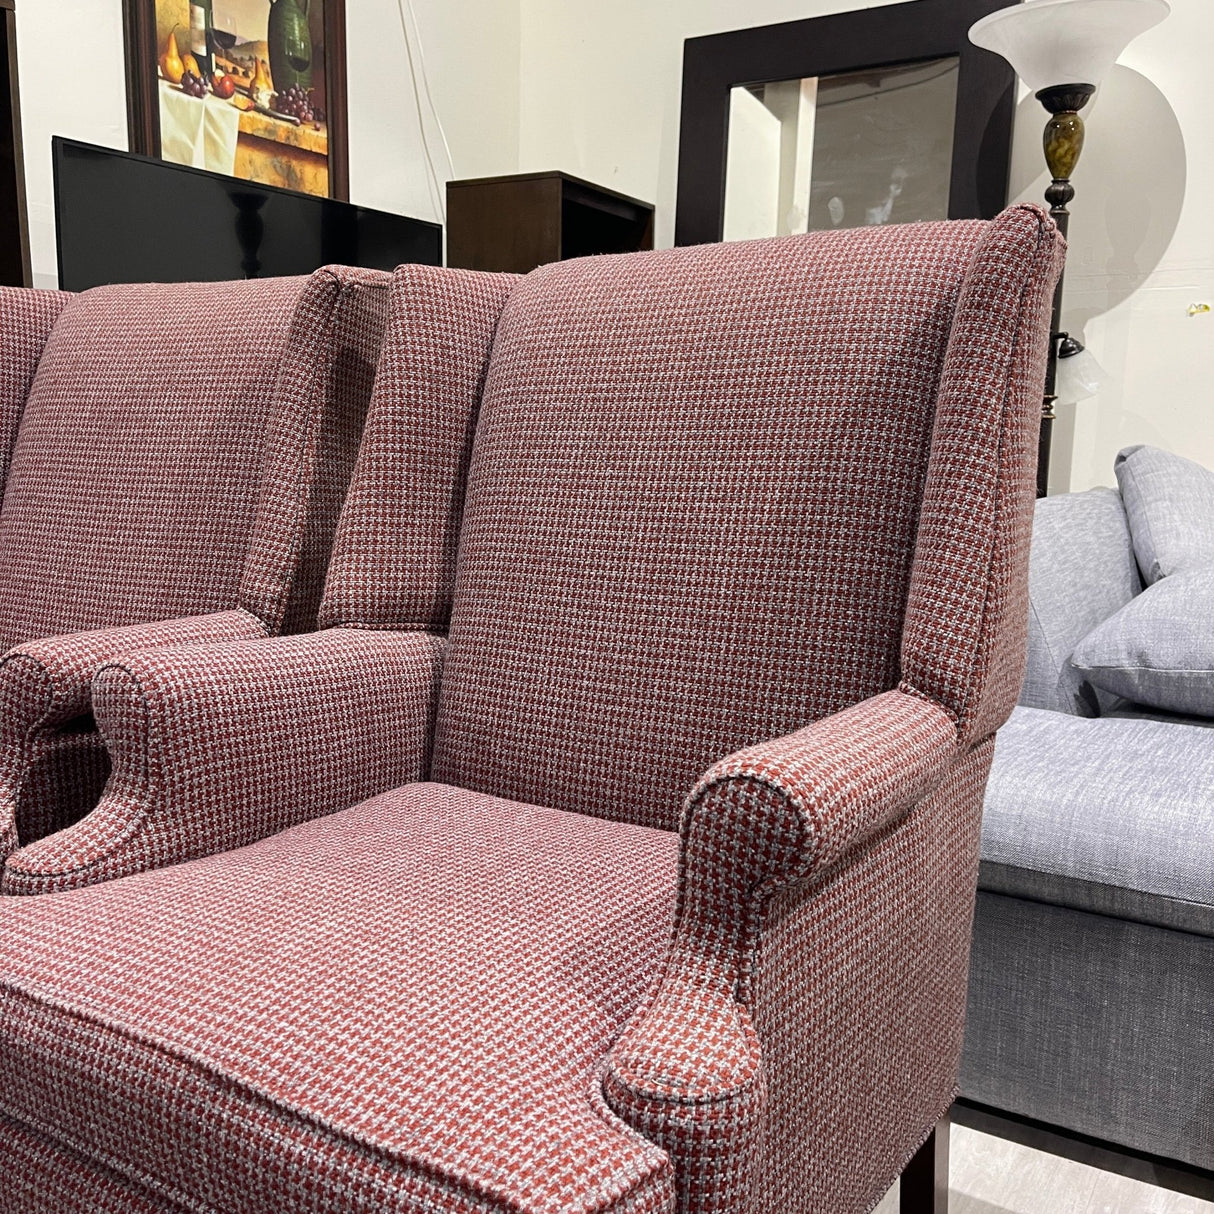 2 Hammary wing chair - enliven mart